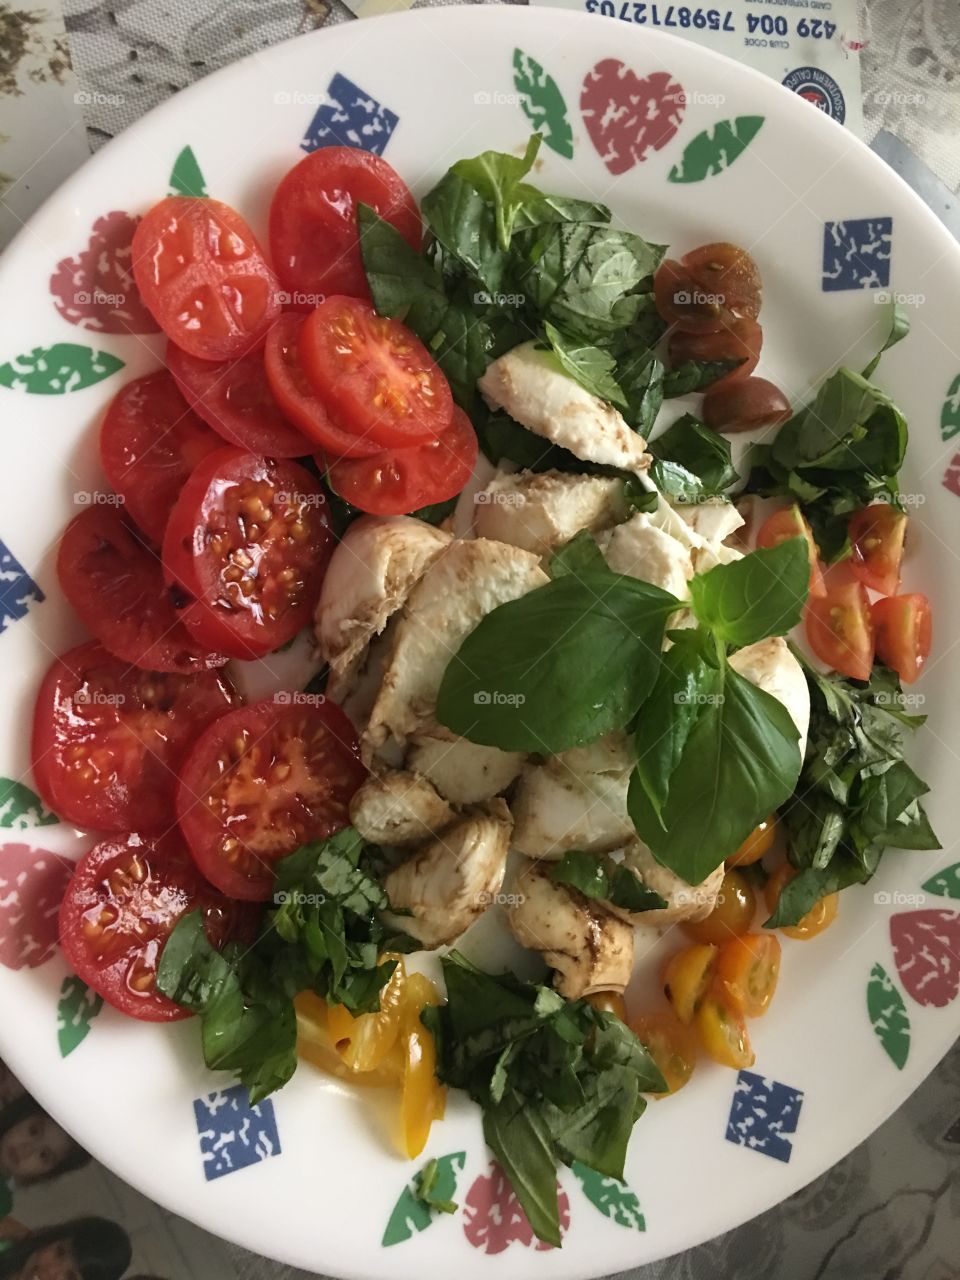 Homegrown Heirloom Tomatoes Caprese Salad with Mozzarella Cheese, Balsamic Vinegar, Extra Virgin Olive Oil and Garden Fresh Basil. #UrbanHomesteader #HomeCooking #FoapApr18 @DominiqueNThieu